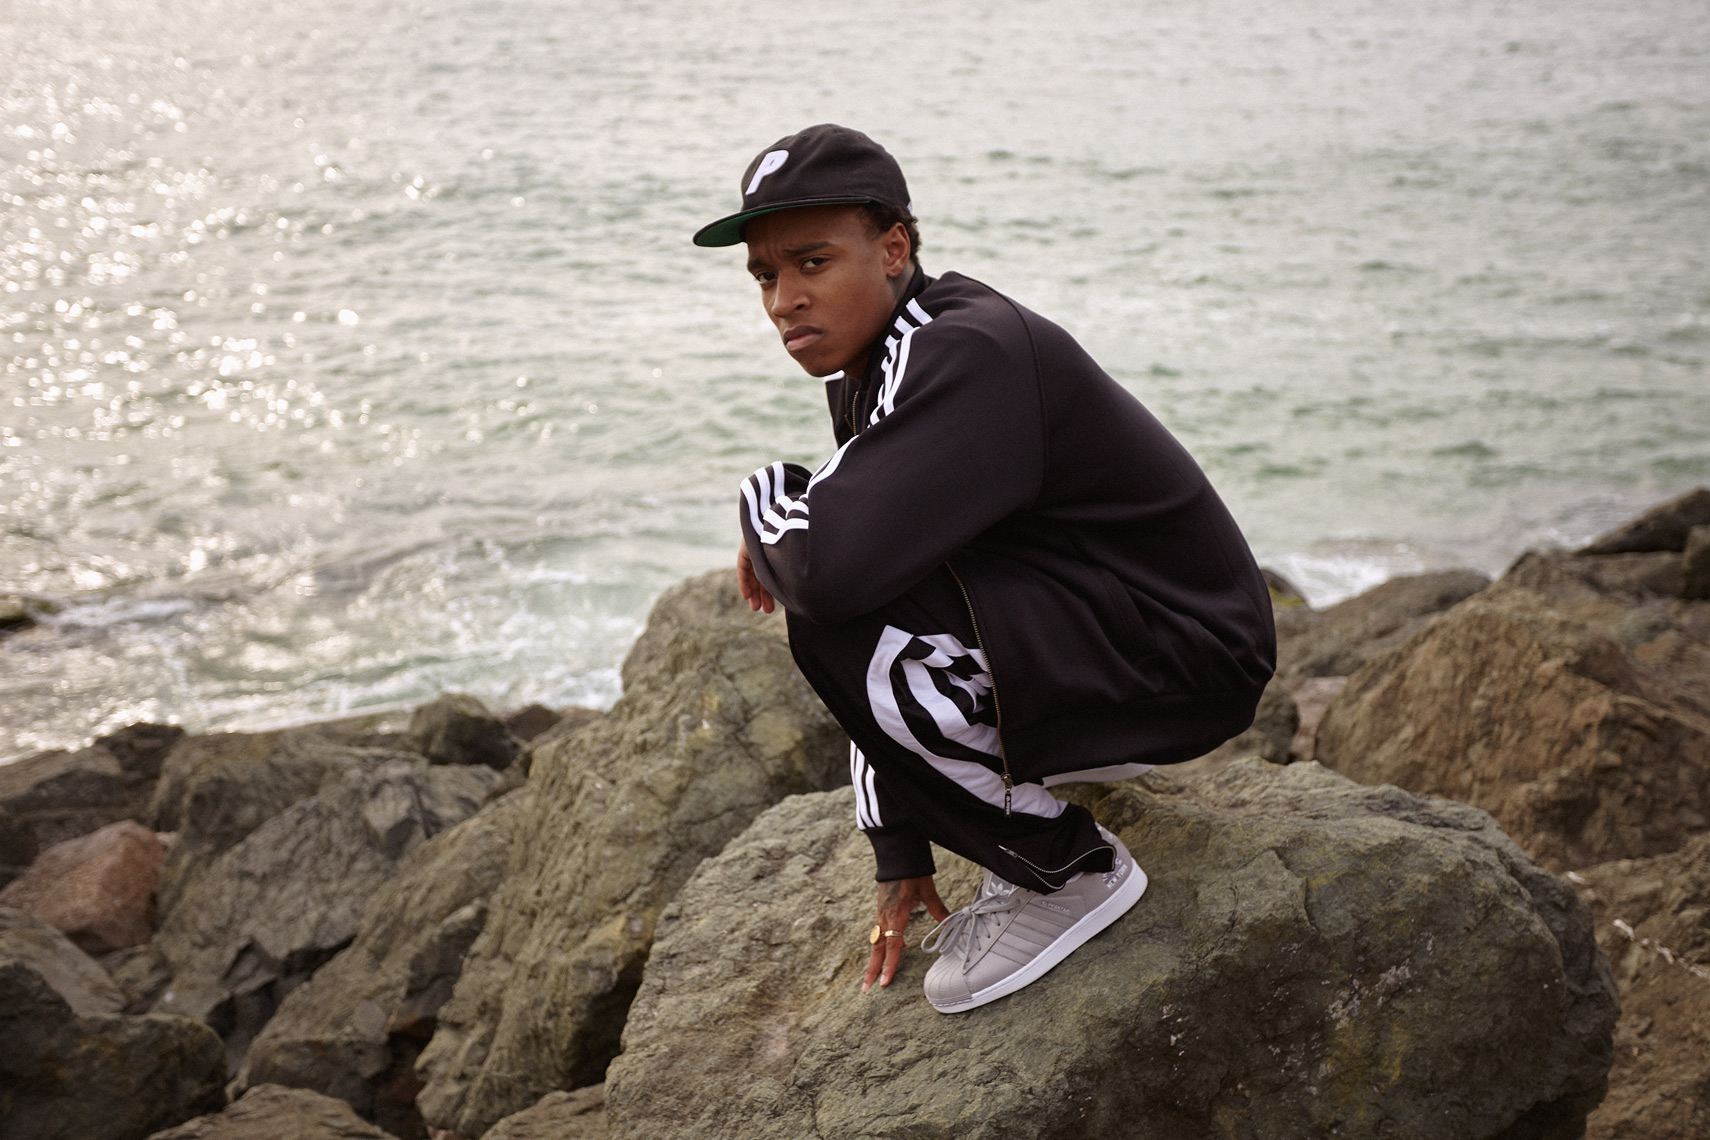 rejjie snow photographed by tom oxley